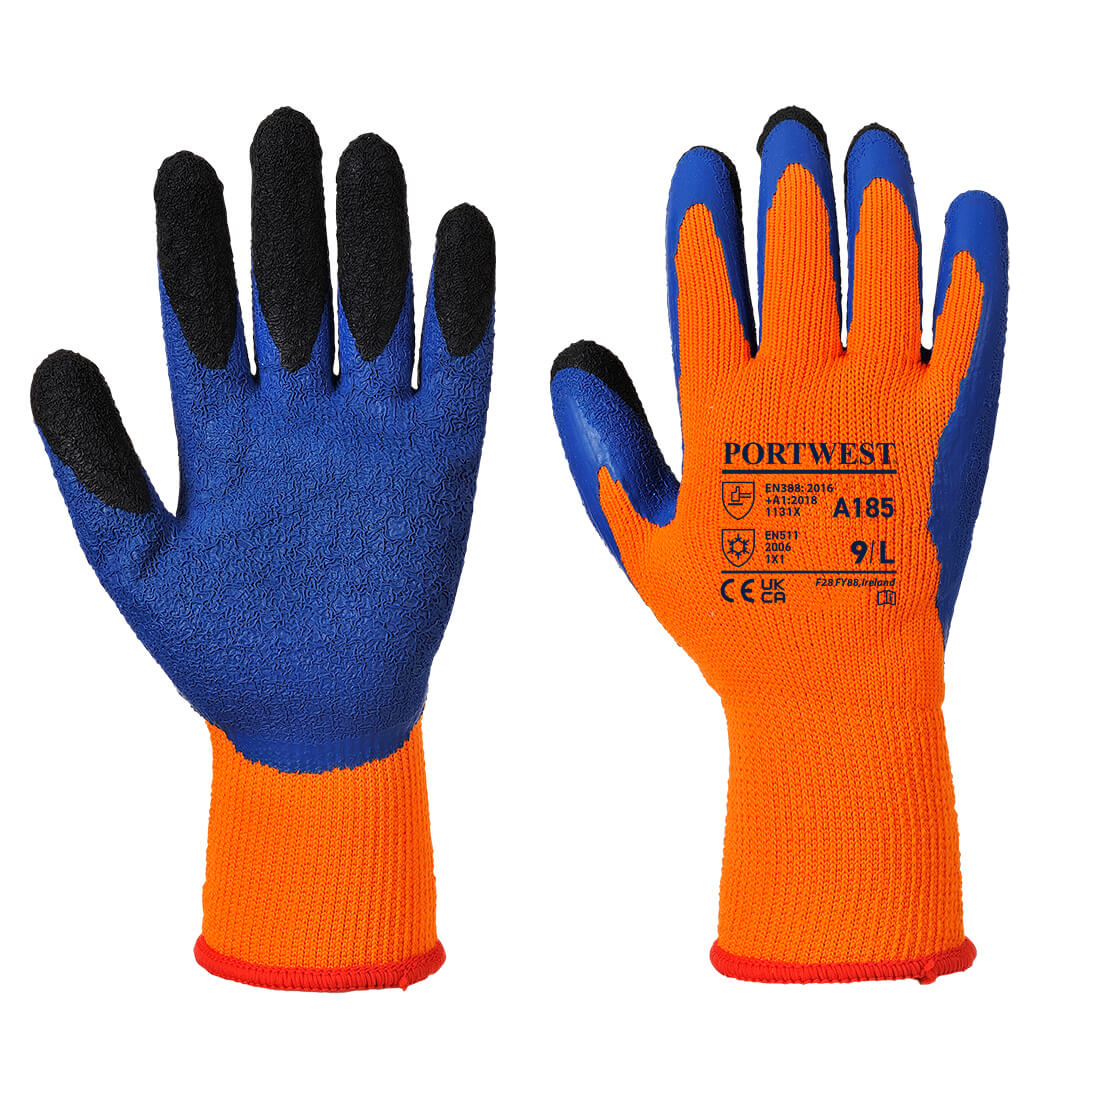 Duo-Therm Glove - Latex Polyester Lined